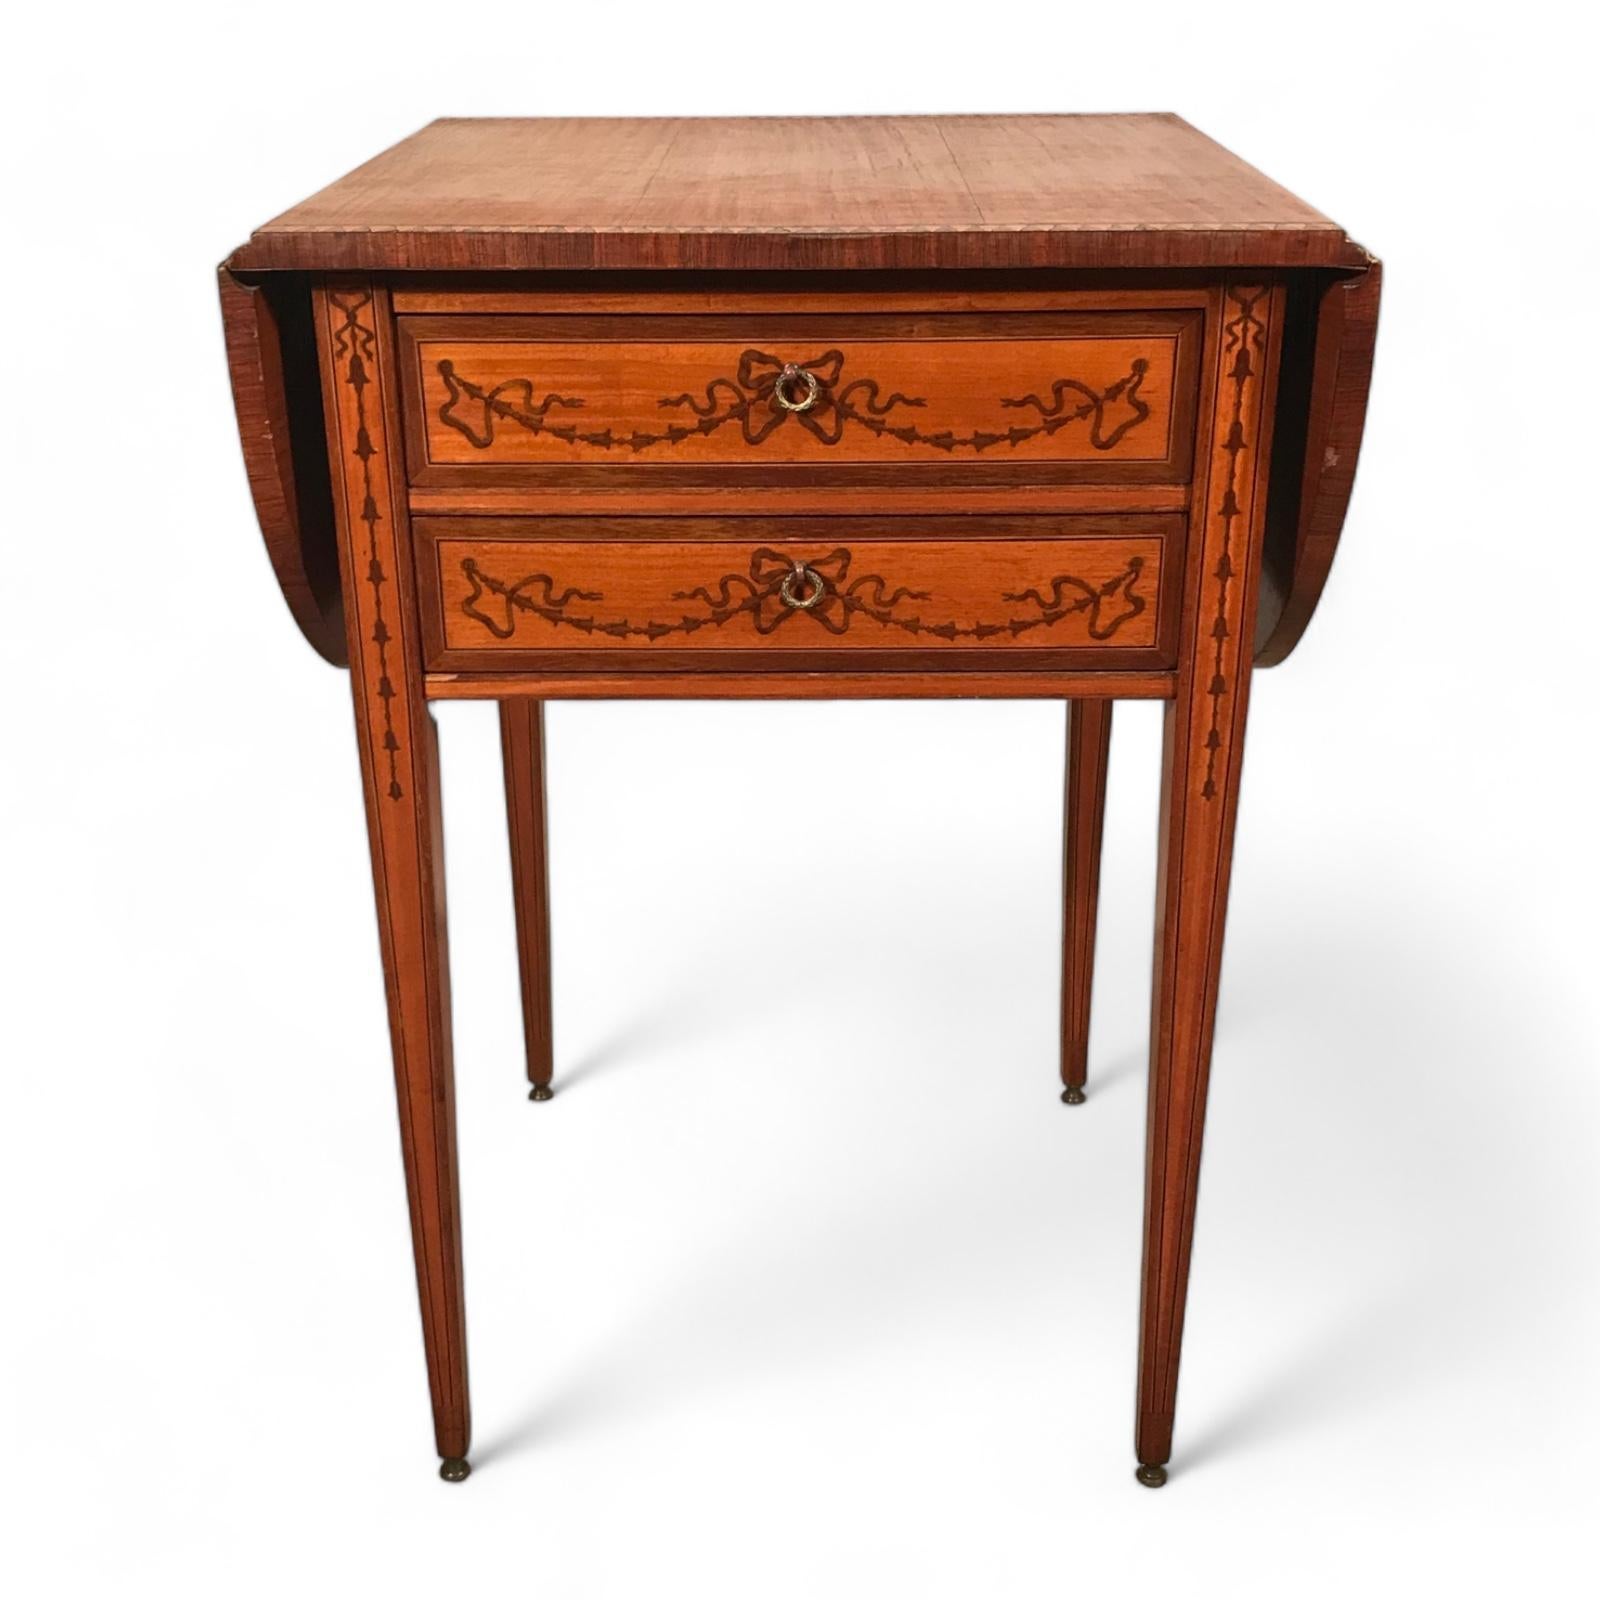 Explore a charming vintage find with our Georgian style side table, dating back to the early 20th century. Standing elegantly on slender legs, this table features a convenient flip-up top adorned with a delightful floral wood inlay on its front,